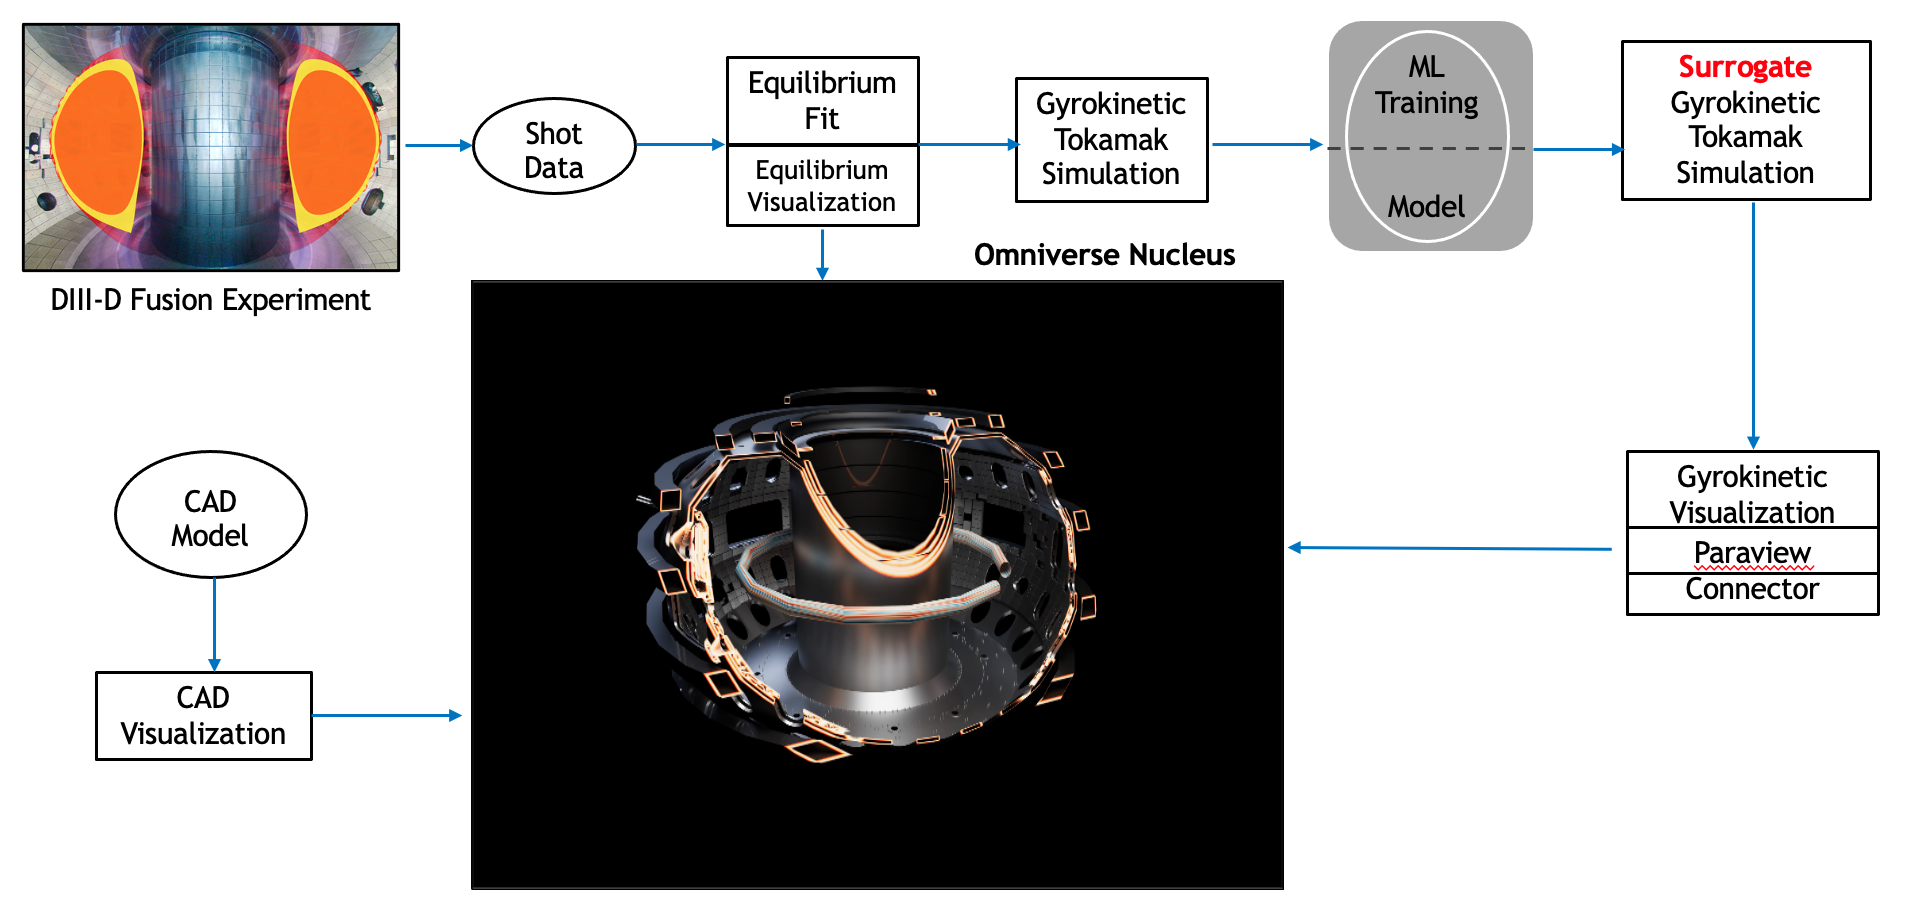 Diagram shows the fusion digital twin experiment workflow starting with shot data, equilibrium fit, gyrokinetic tokamak simulation, and through to ML training, gyrokinetic visualization, and CAD visualization.